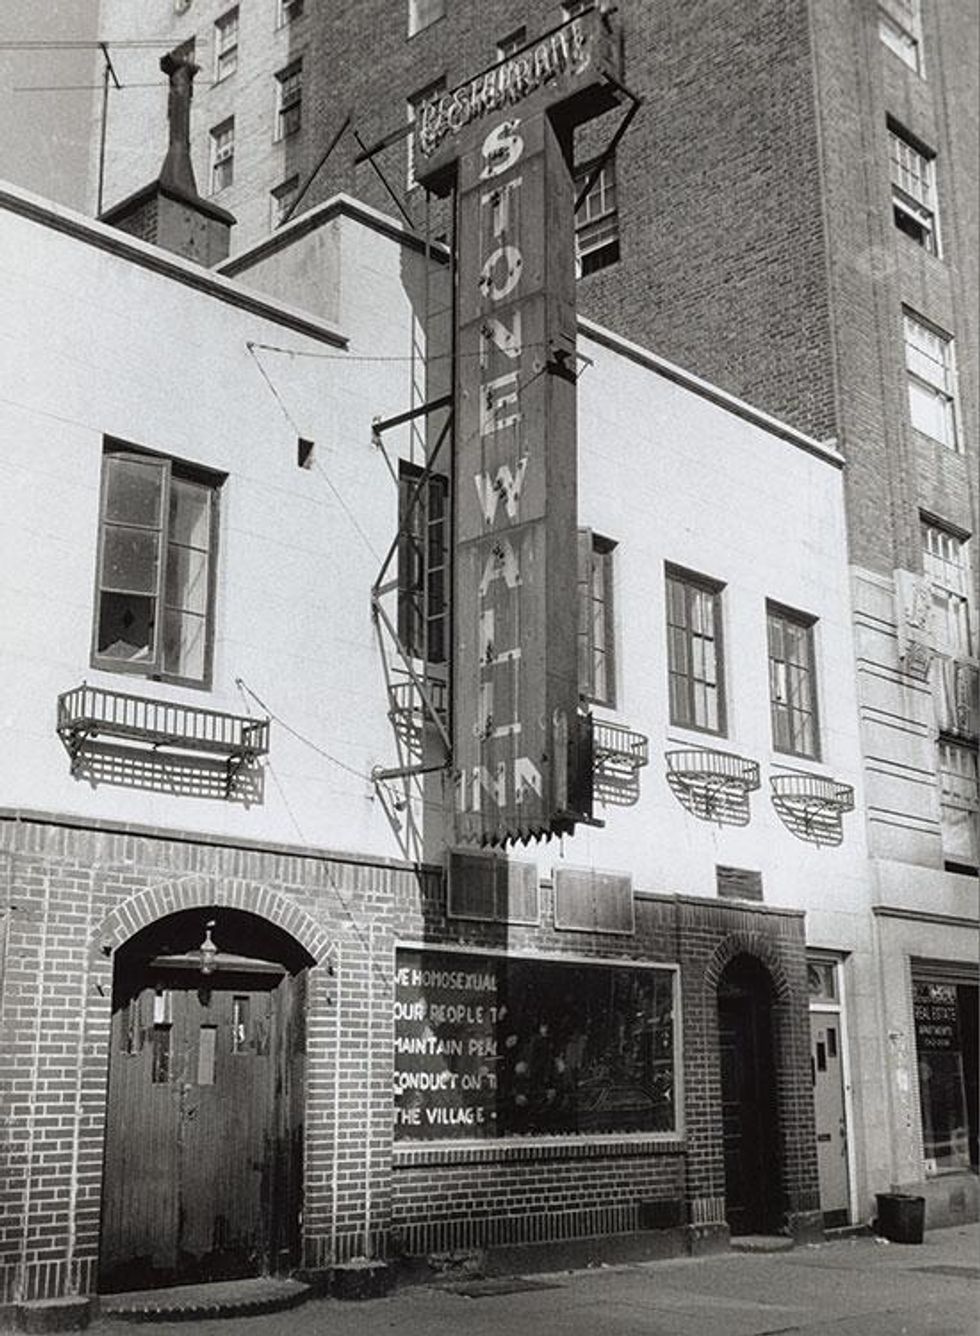 Stonewall Inn, 1969. Photograph by Diana Davies. Courtesy of New York Public Libraries Manuscript and Archives Division.